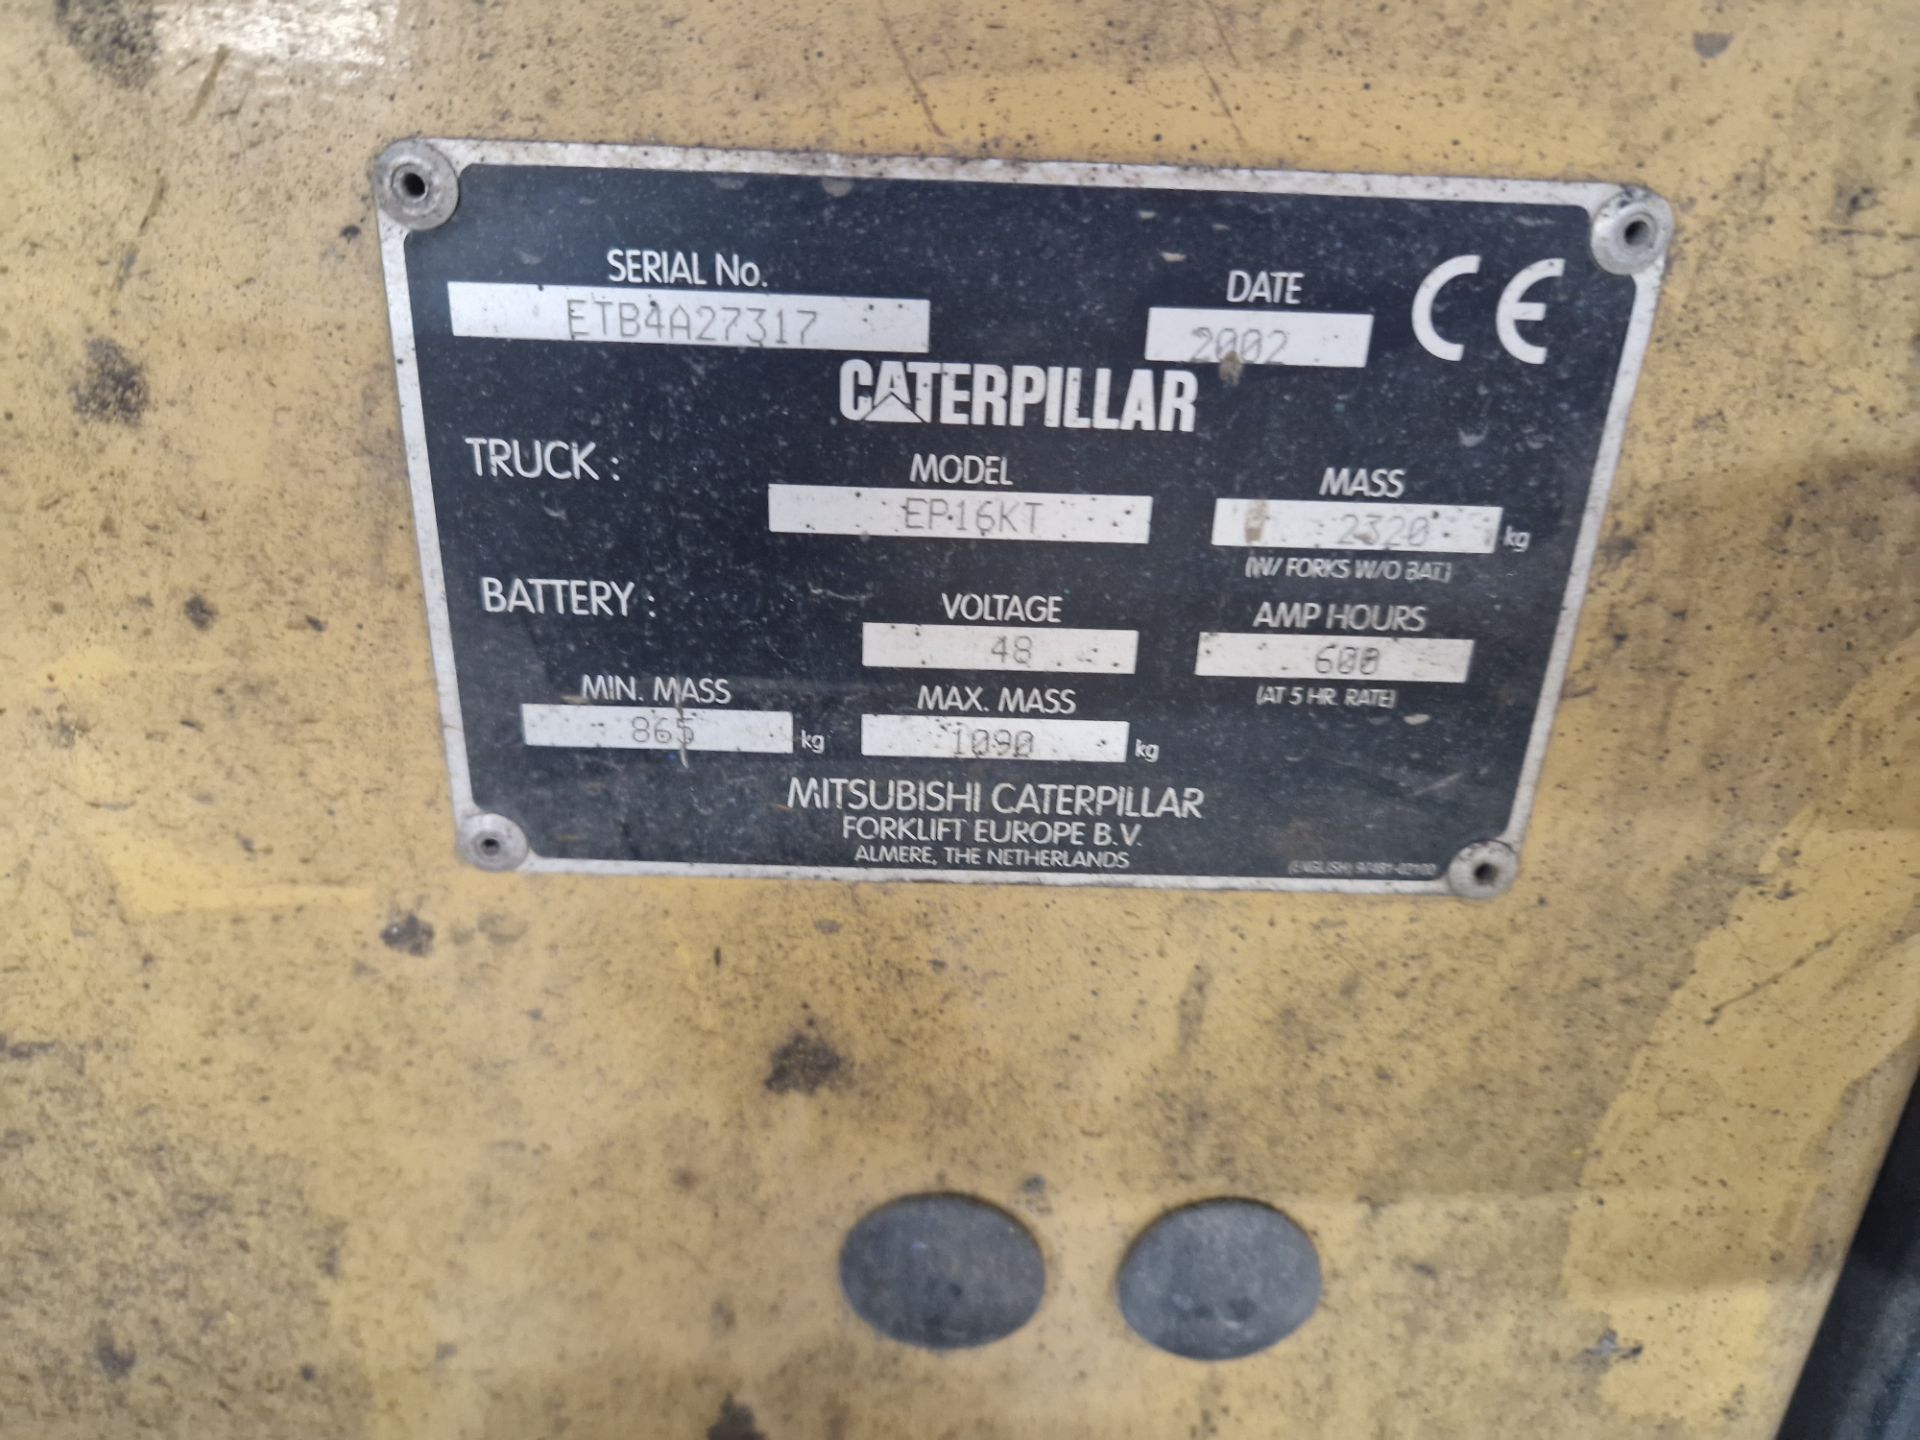 Caterpillar EP16KT 1600 kg cap. Battery Electric Fork Lift Truck, serial no. ETB4A27317, year of - Image 6 of 6